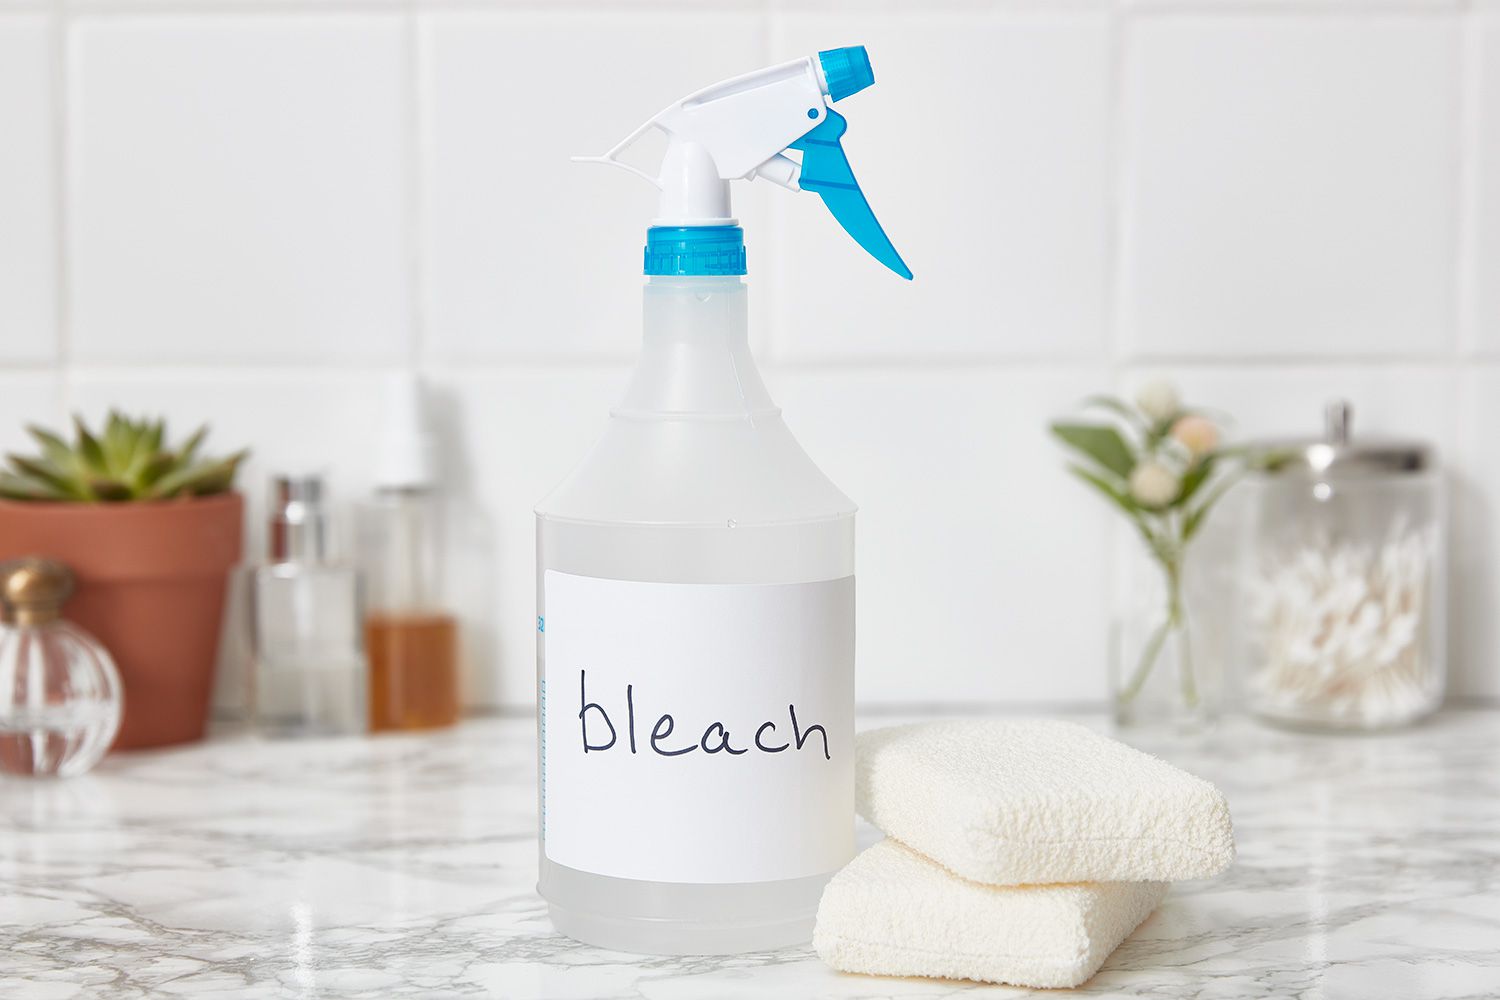 How to Make a DIY Disinfecting Bleach Cleaning Spray